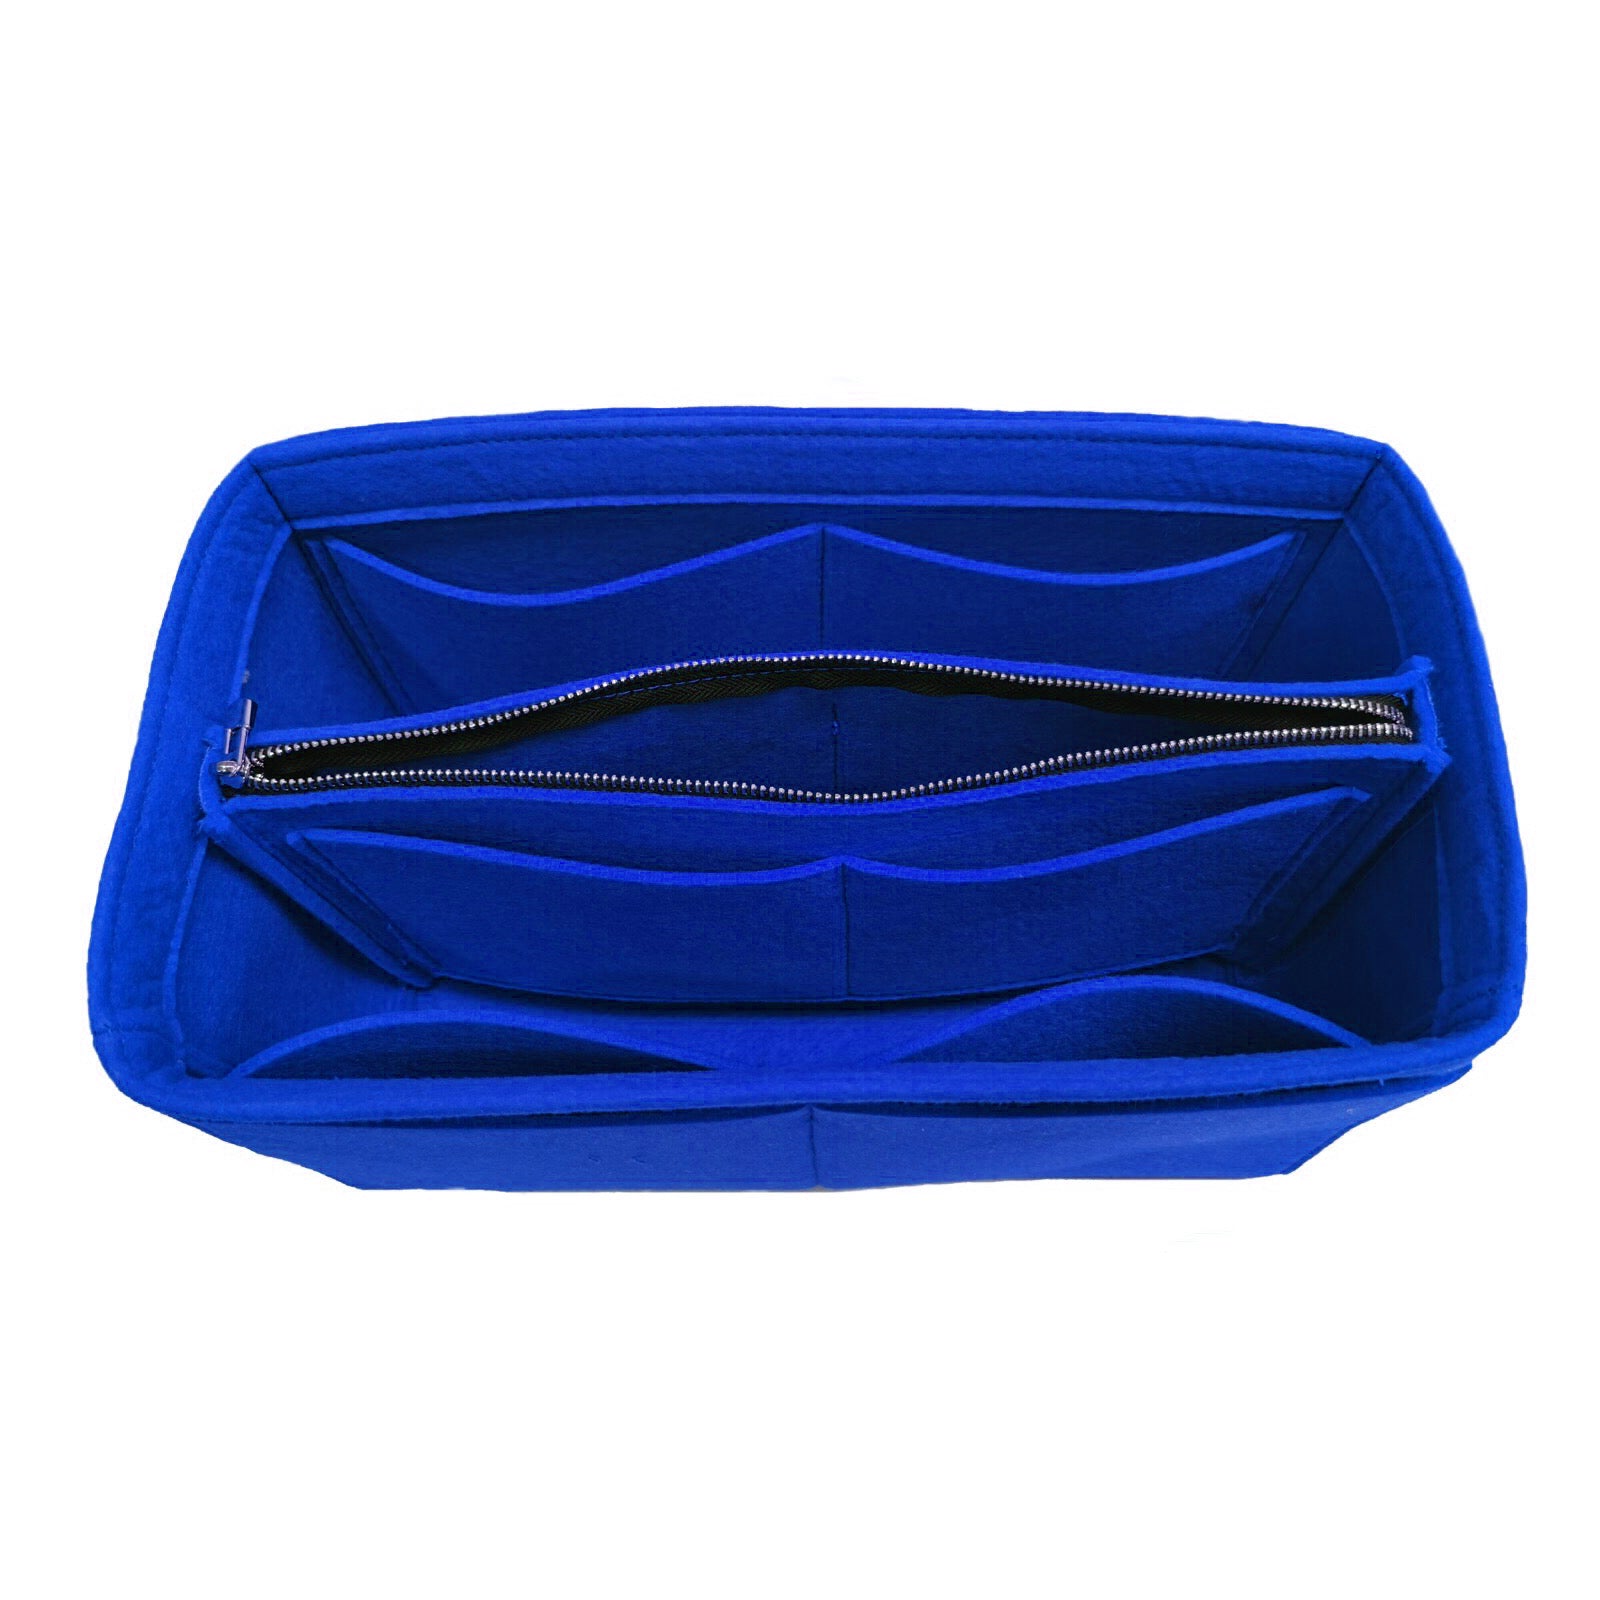 Divitize® Organizer for Cabas Y (ChYc) bag